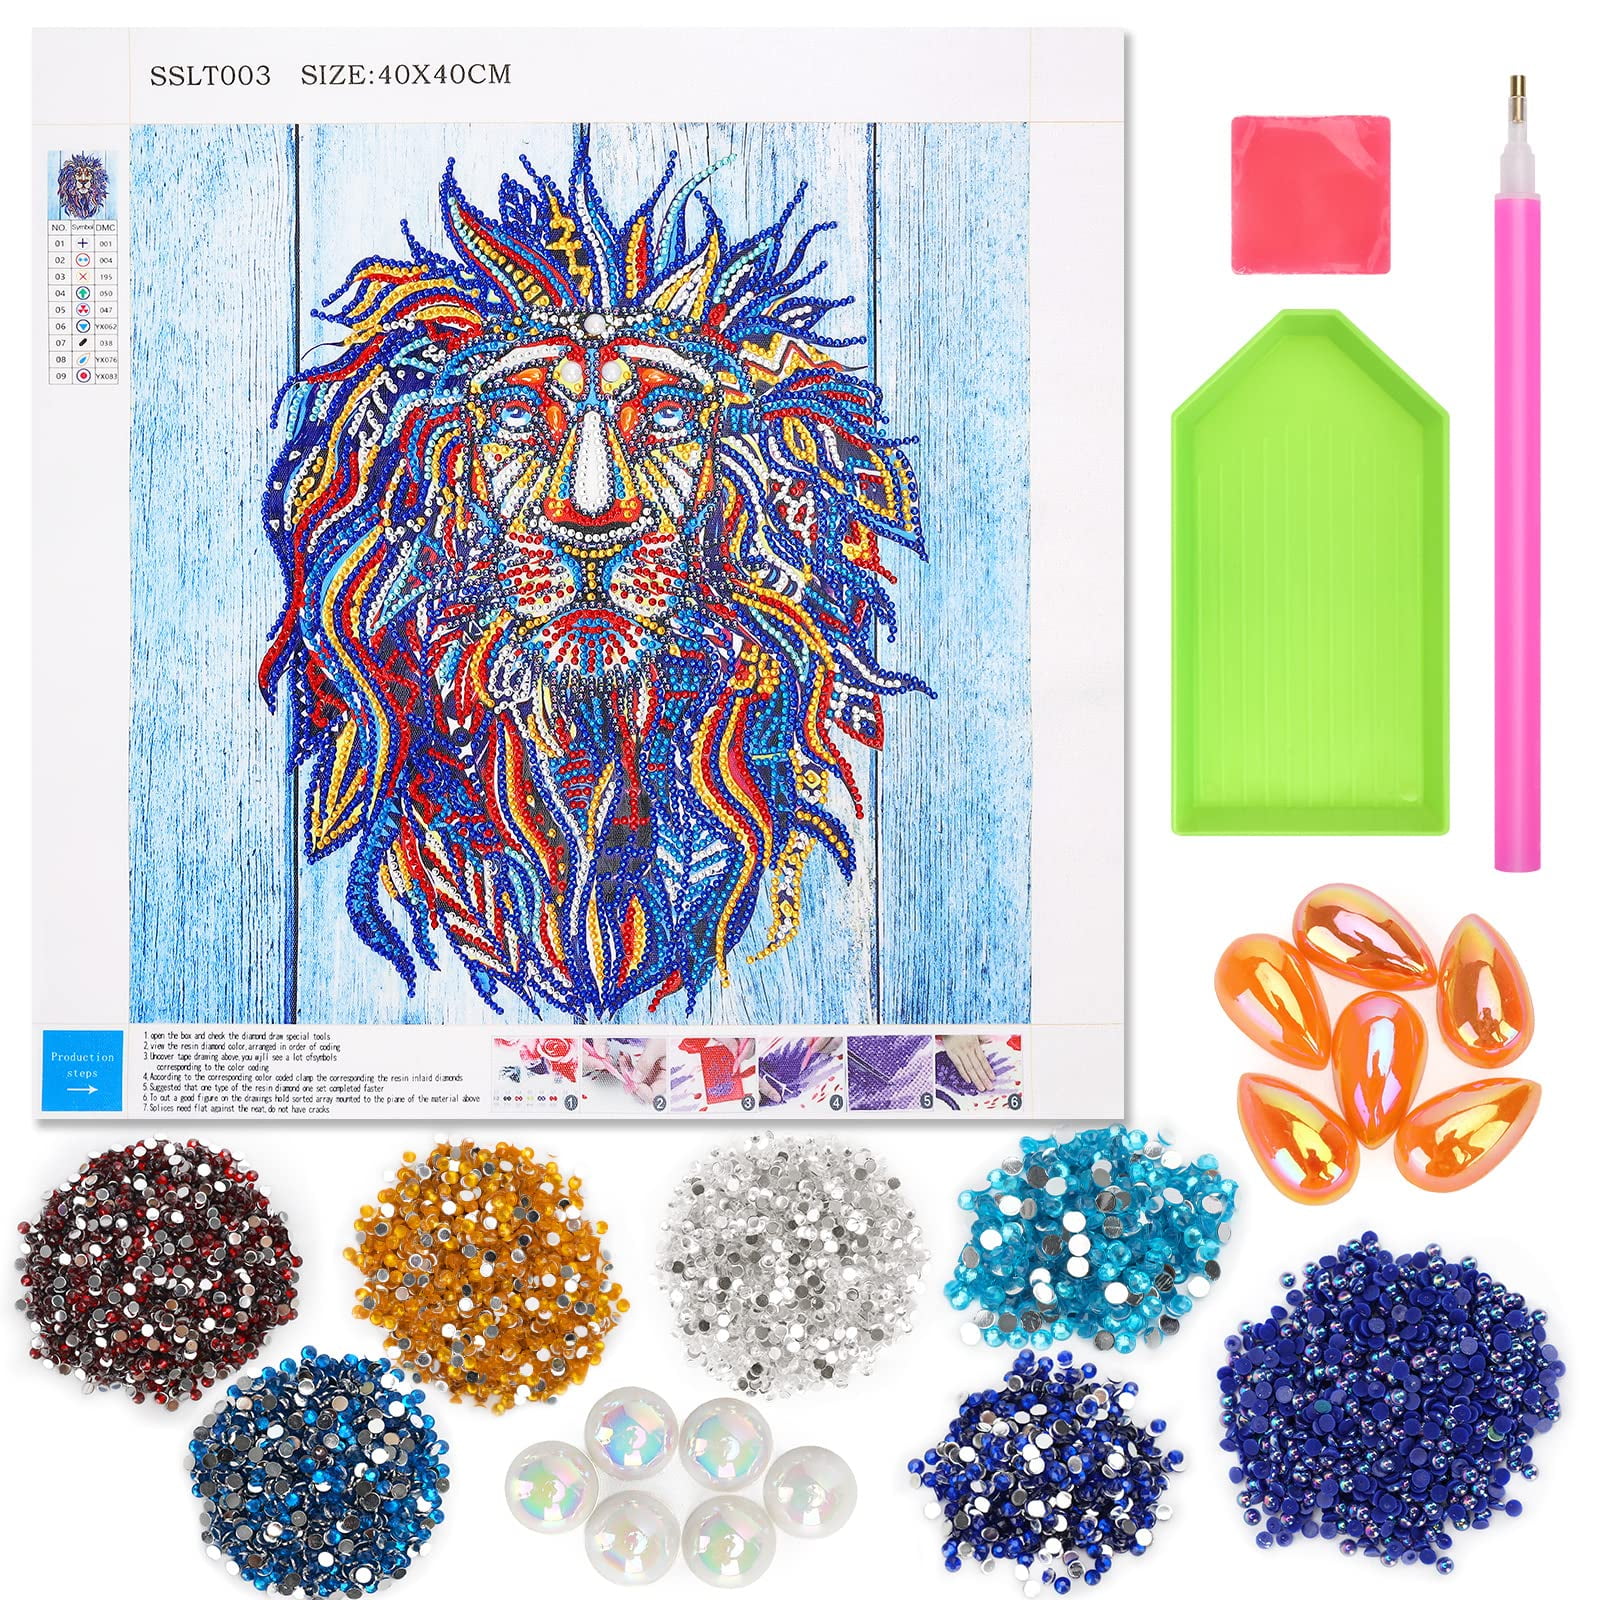 Diamond Painting By Number Kits, diamond painting months of the year set